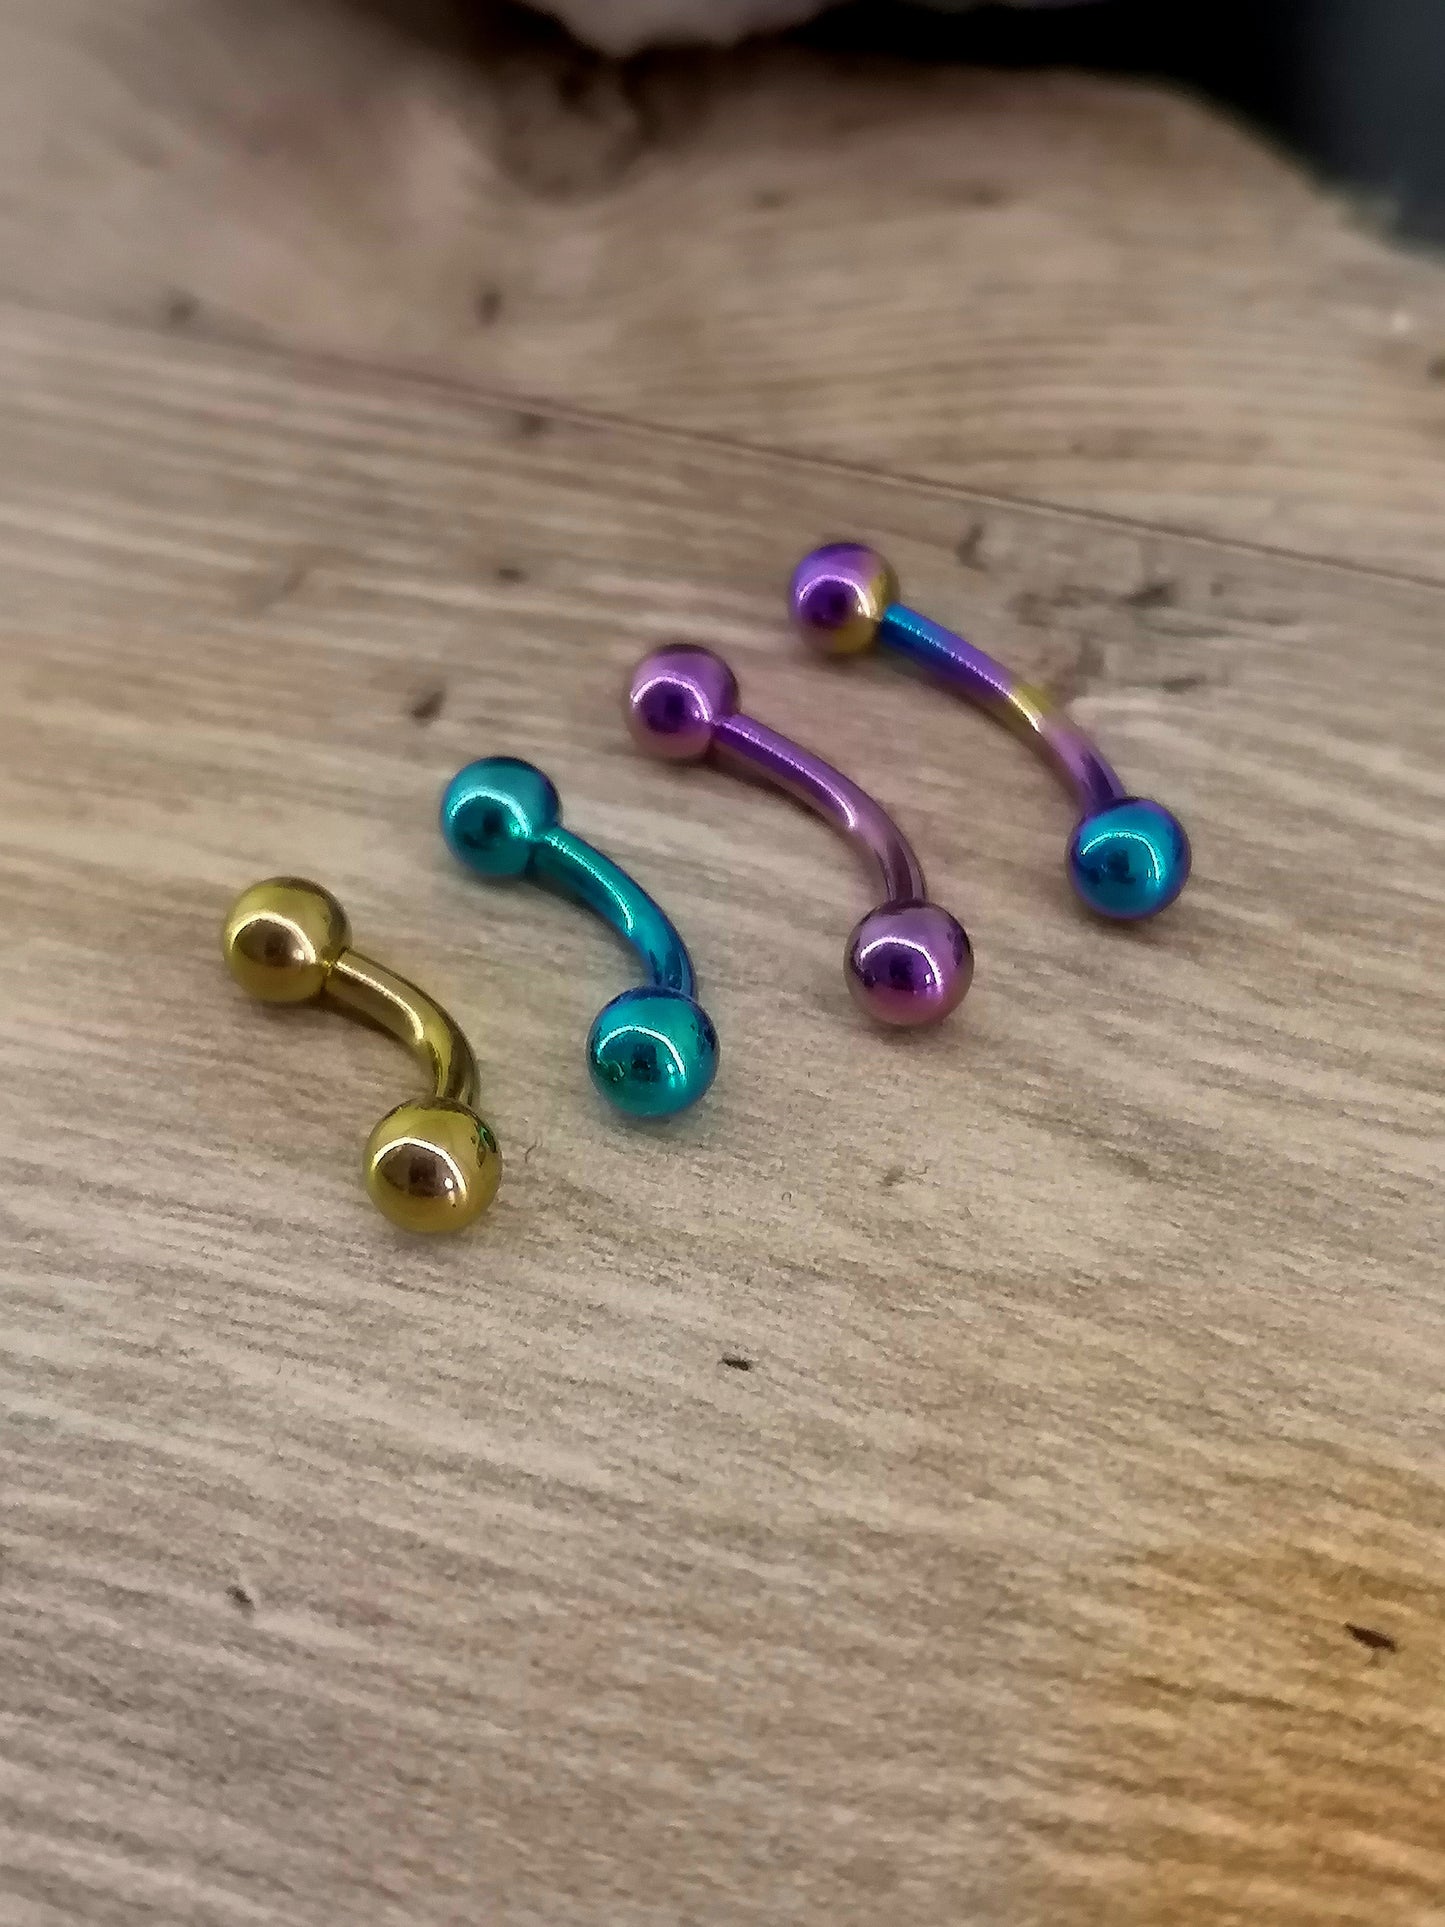 Anodised Titanium 1.6mm Curved Barbell